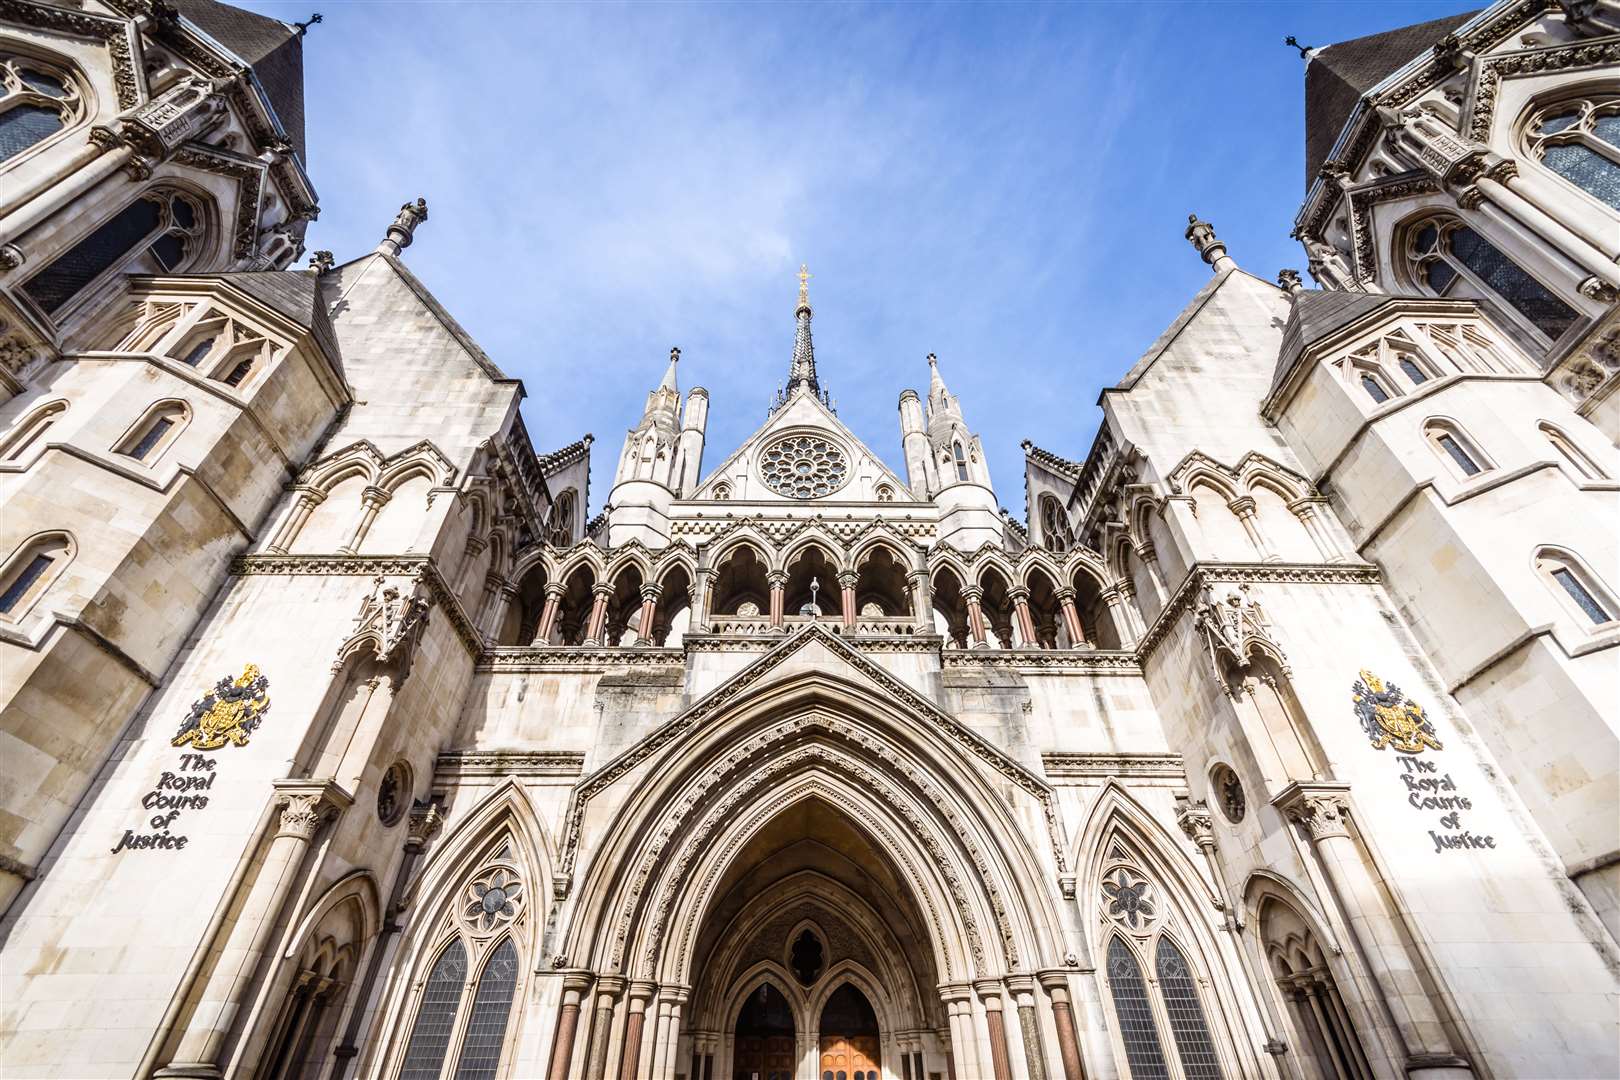 Known as The Law Courts, The Royal Courts of Justice, located in Westminster, houses the High Court and Court of Appeal of England and Wales